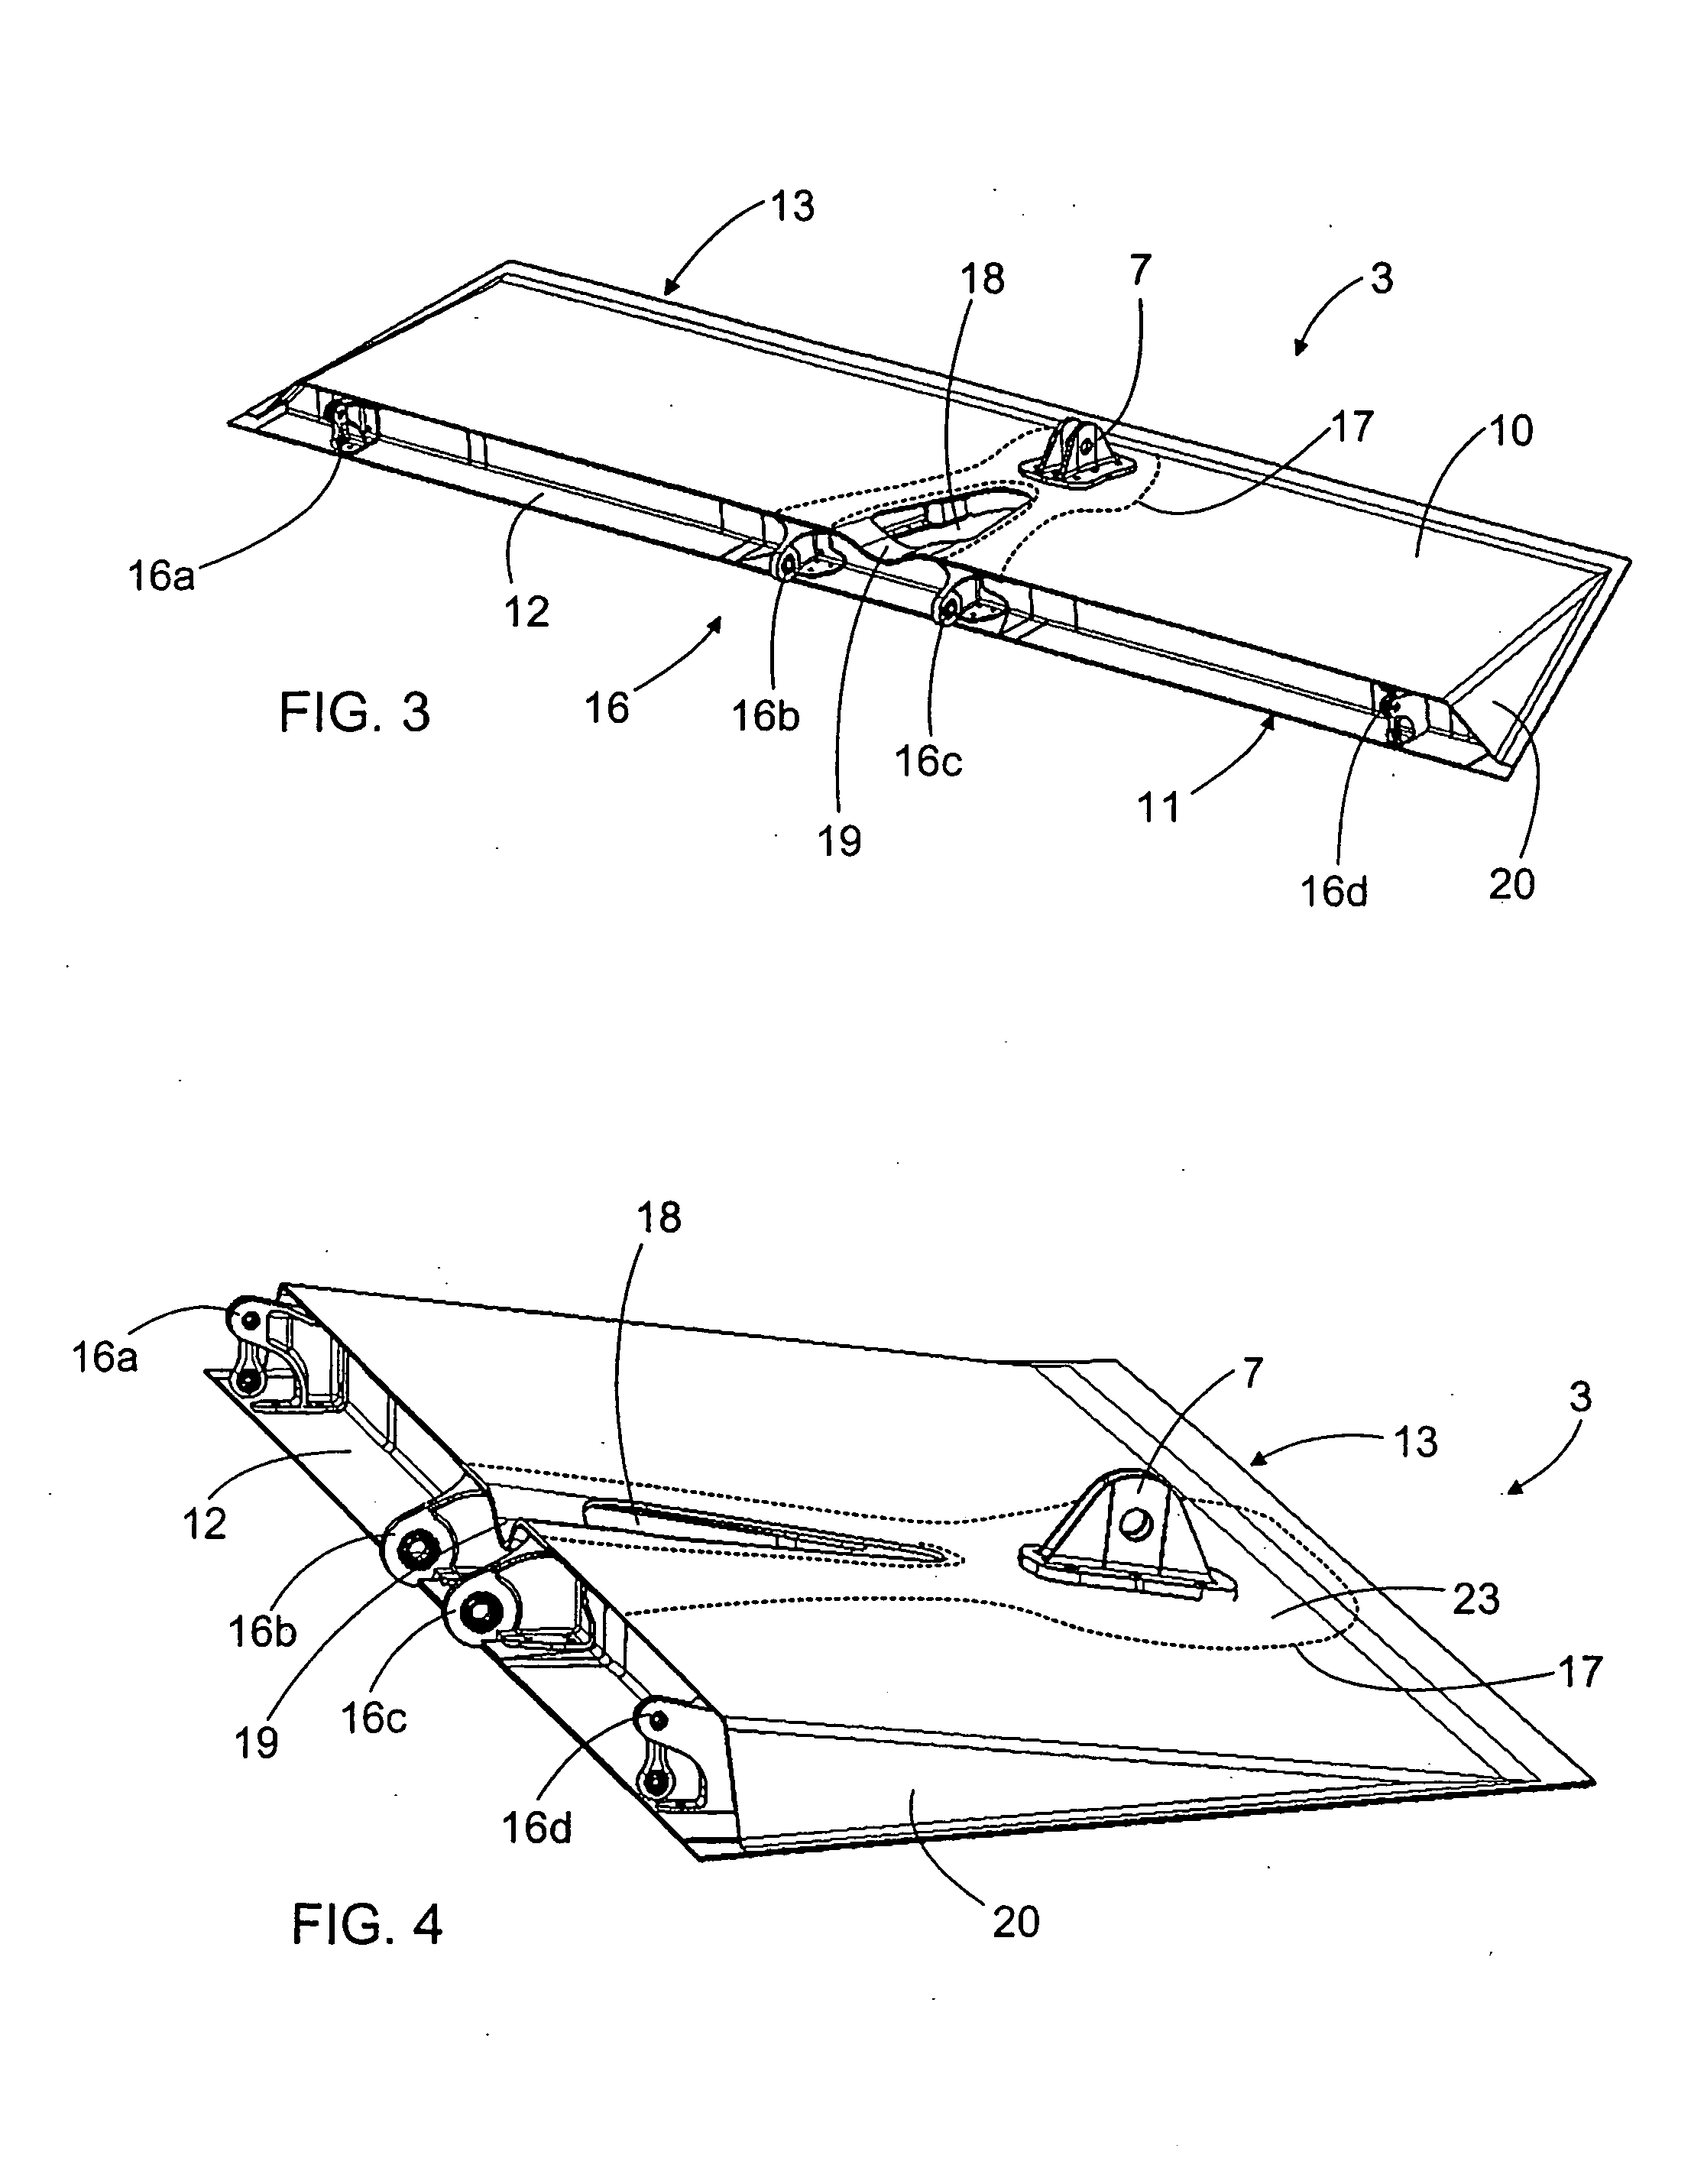 Pivoting panel for aircraft, and composite support piece